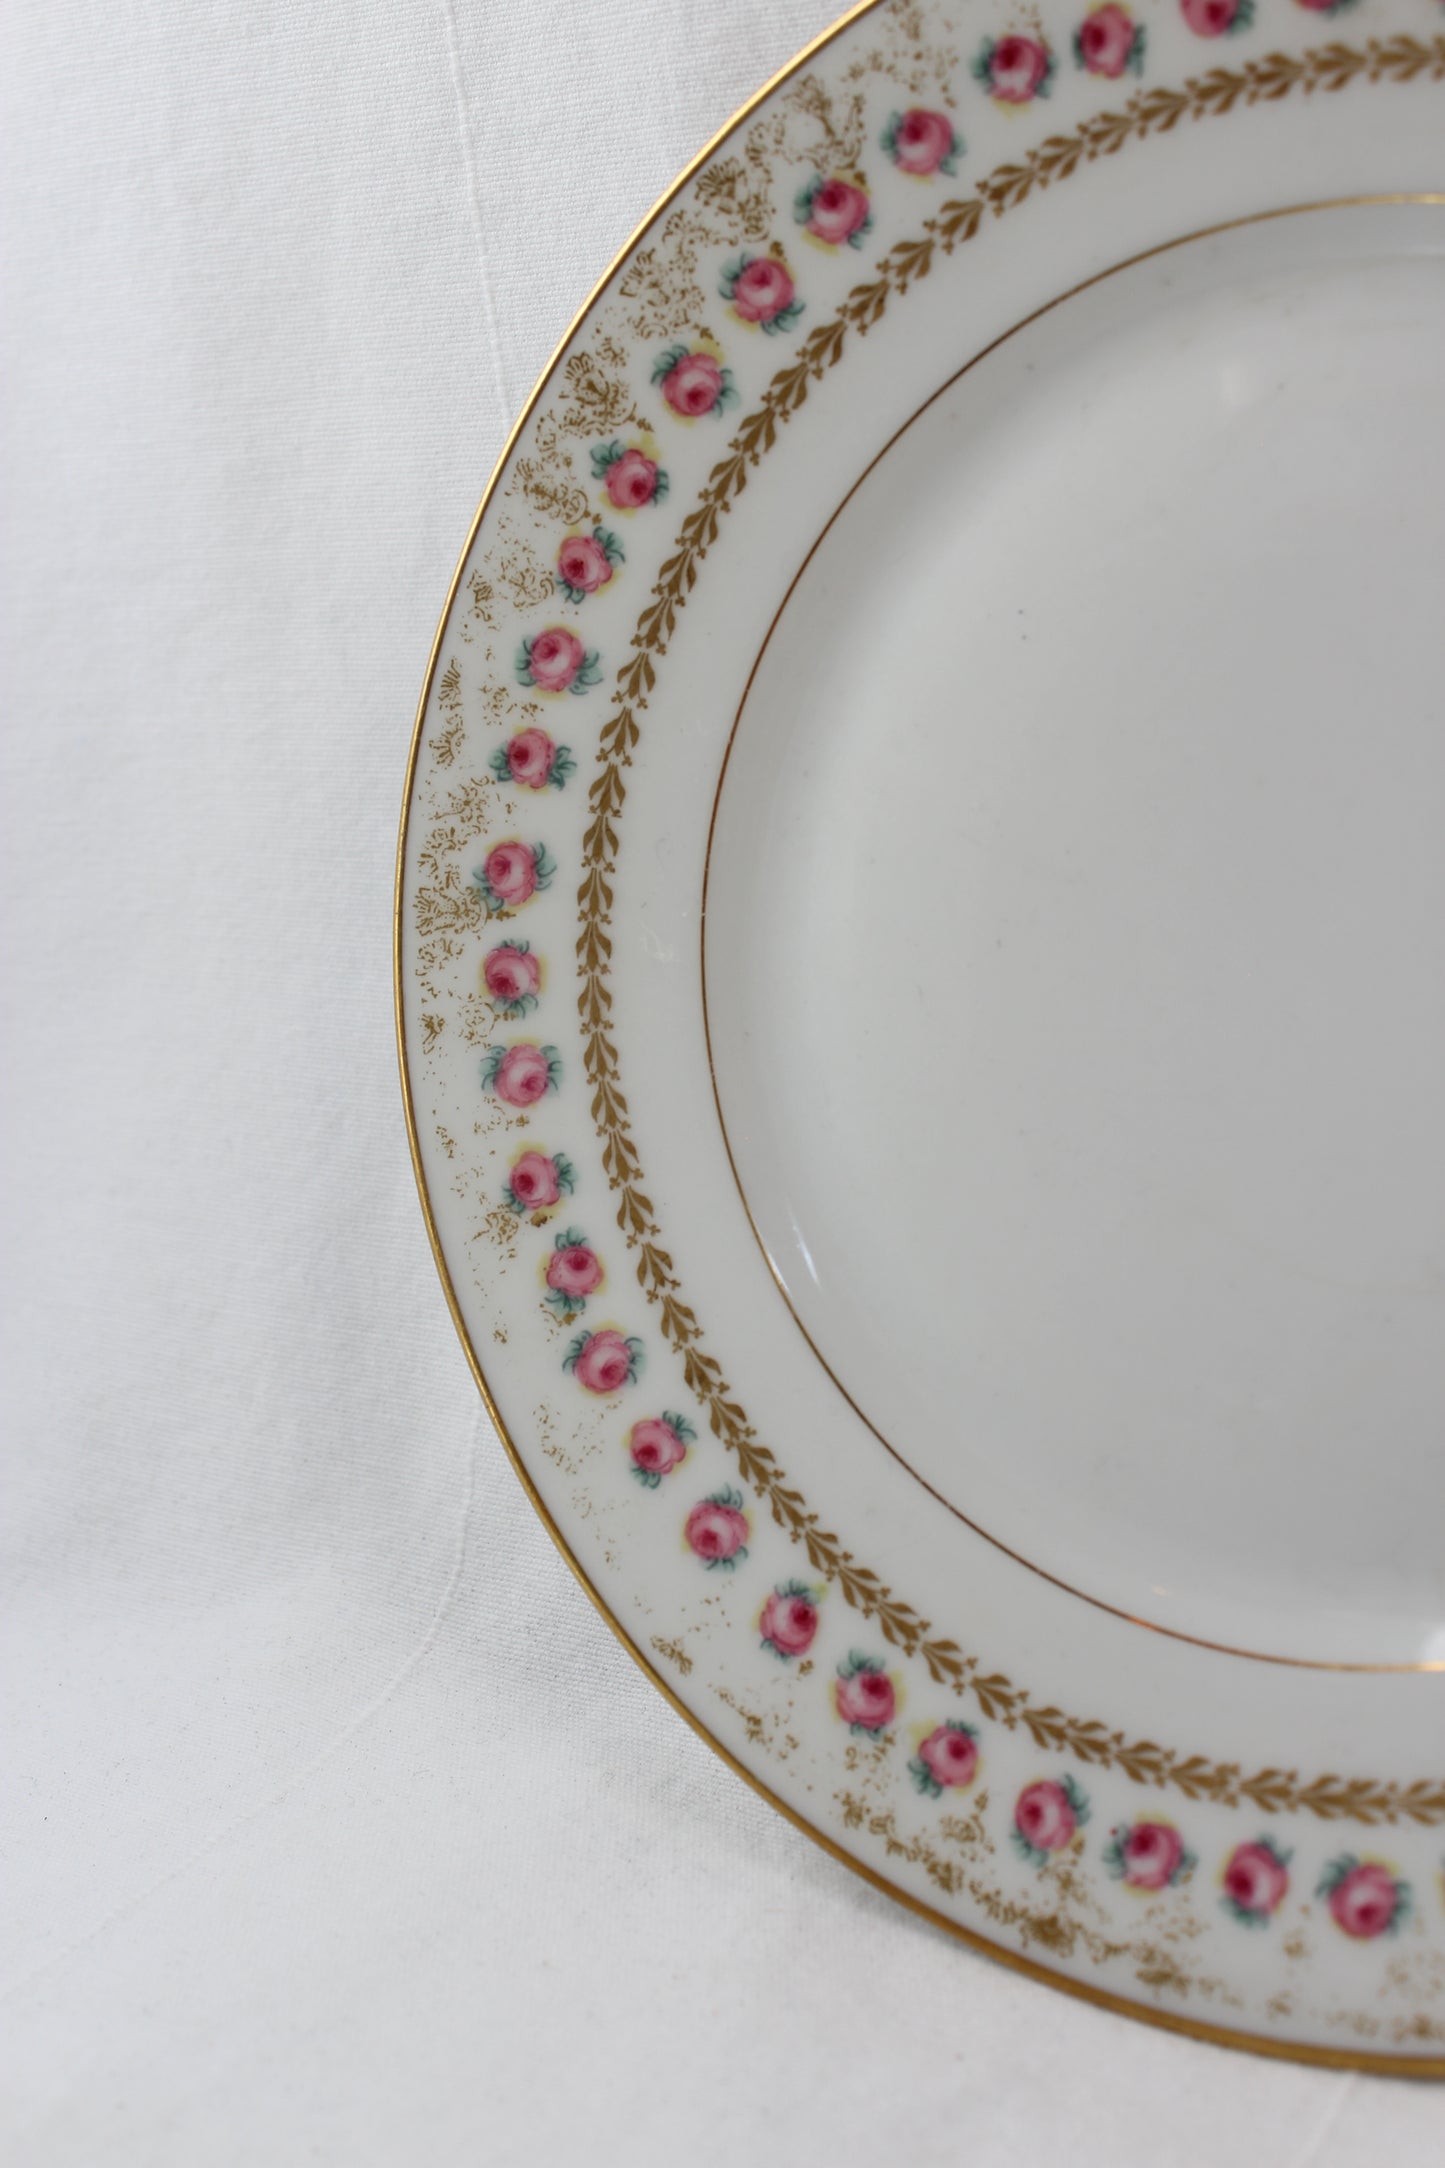 Flowered French Limoge plate